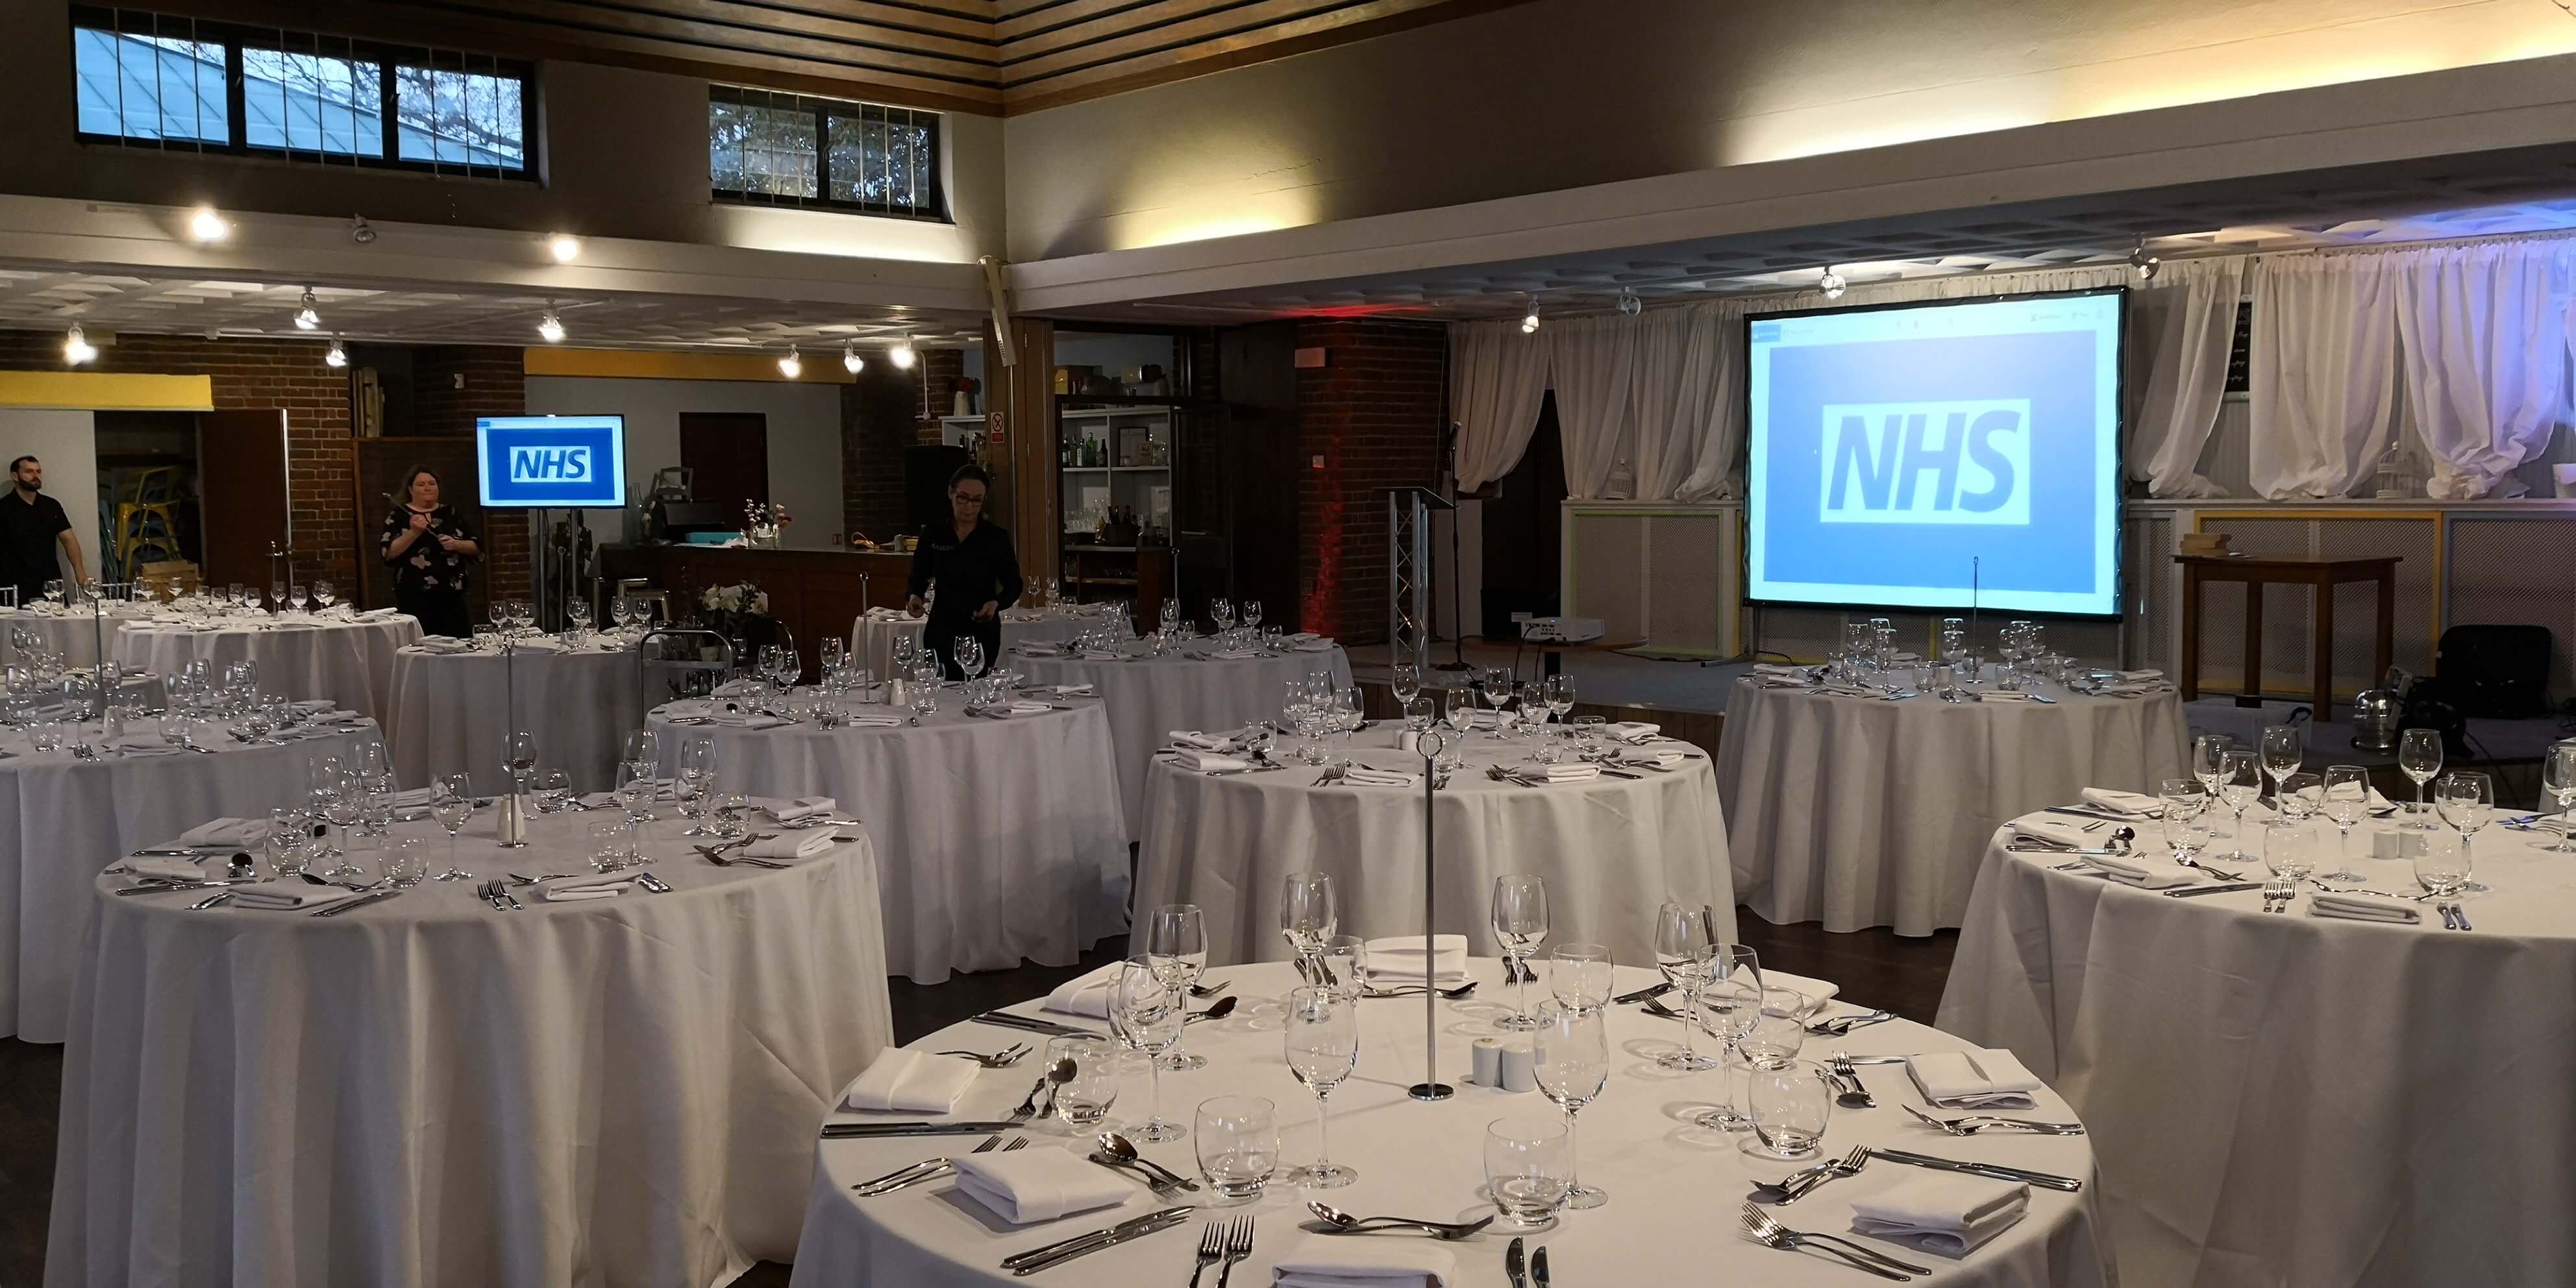 Audio visual hire for the NHS in Guildford